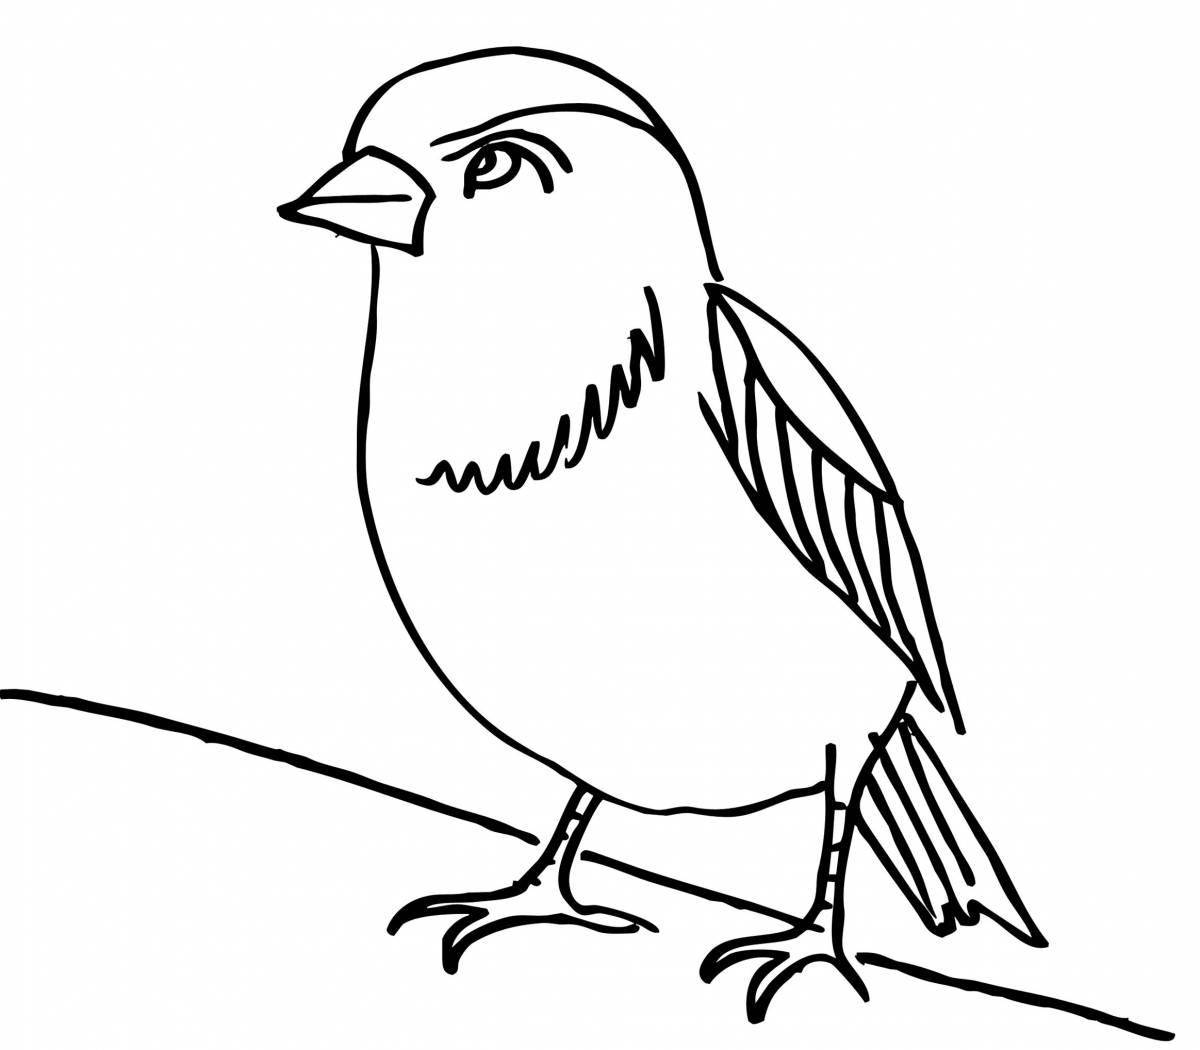 Glowing sparrow coloring book for 3-4 year olds